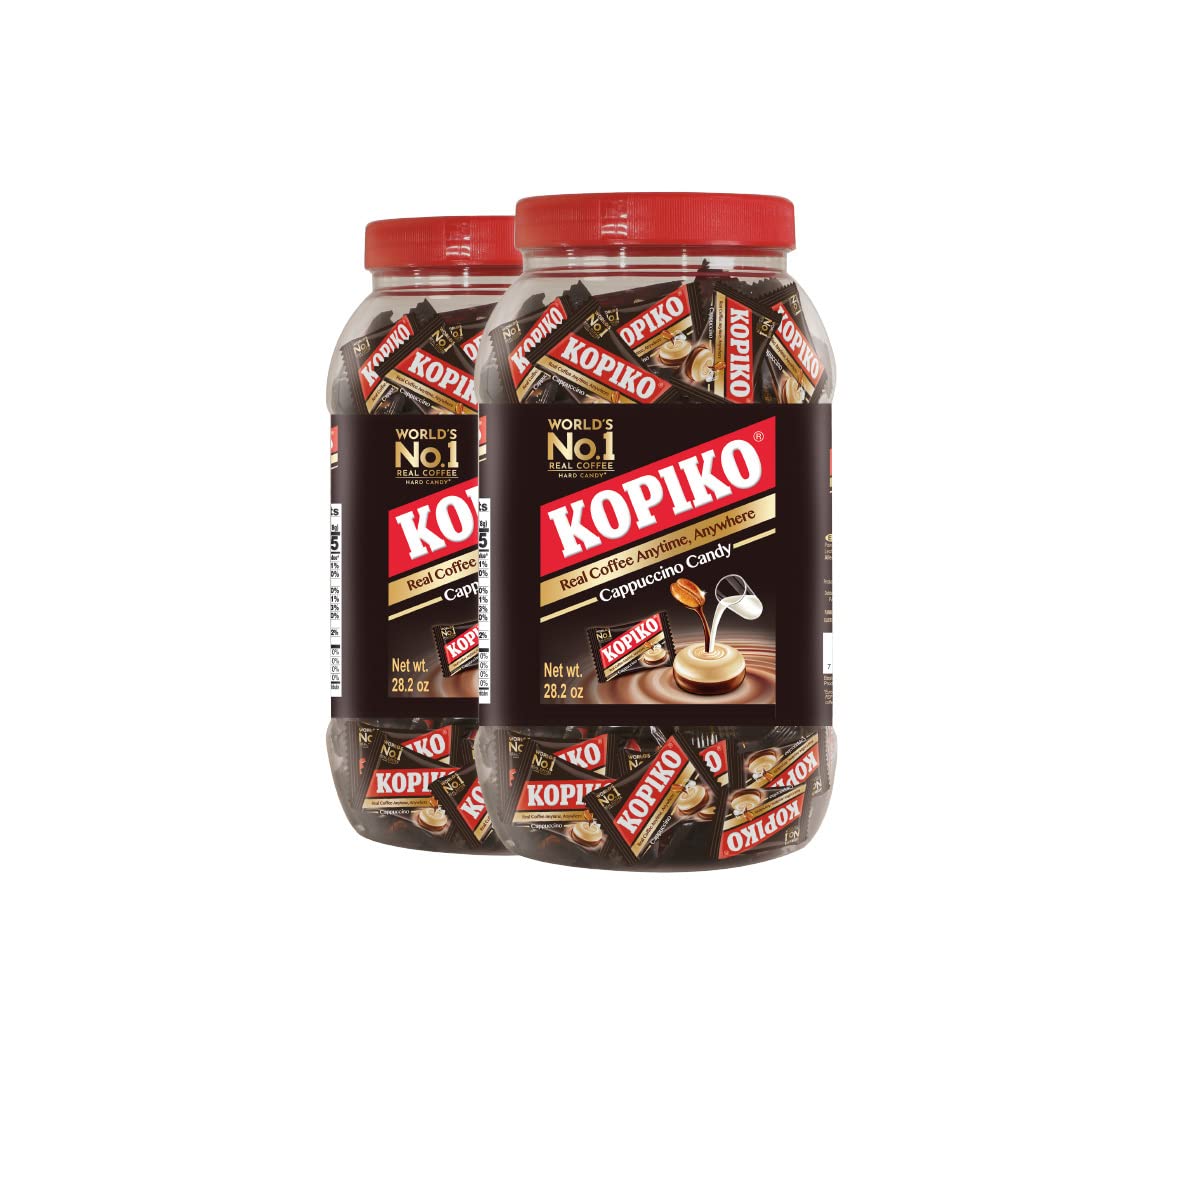 Kopiko Coffee Candy Your Take-Out Pocket Coffee for Every Occasion - Hard Candy Made from Indonesia’s Coffee Beans Contains Real Coffee Extract for Better Taste (800 gr Jar)